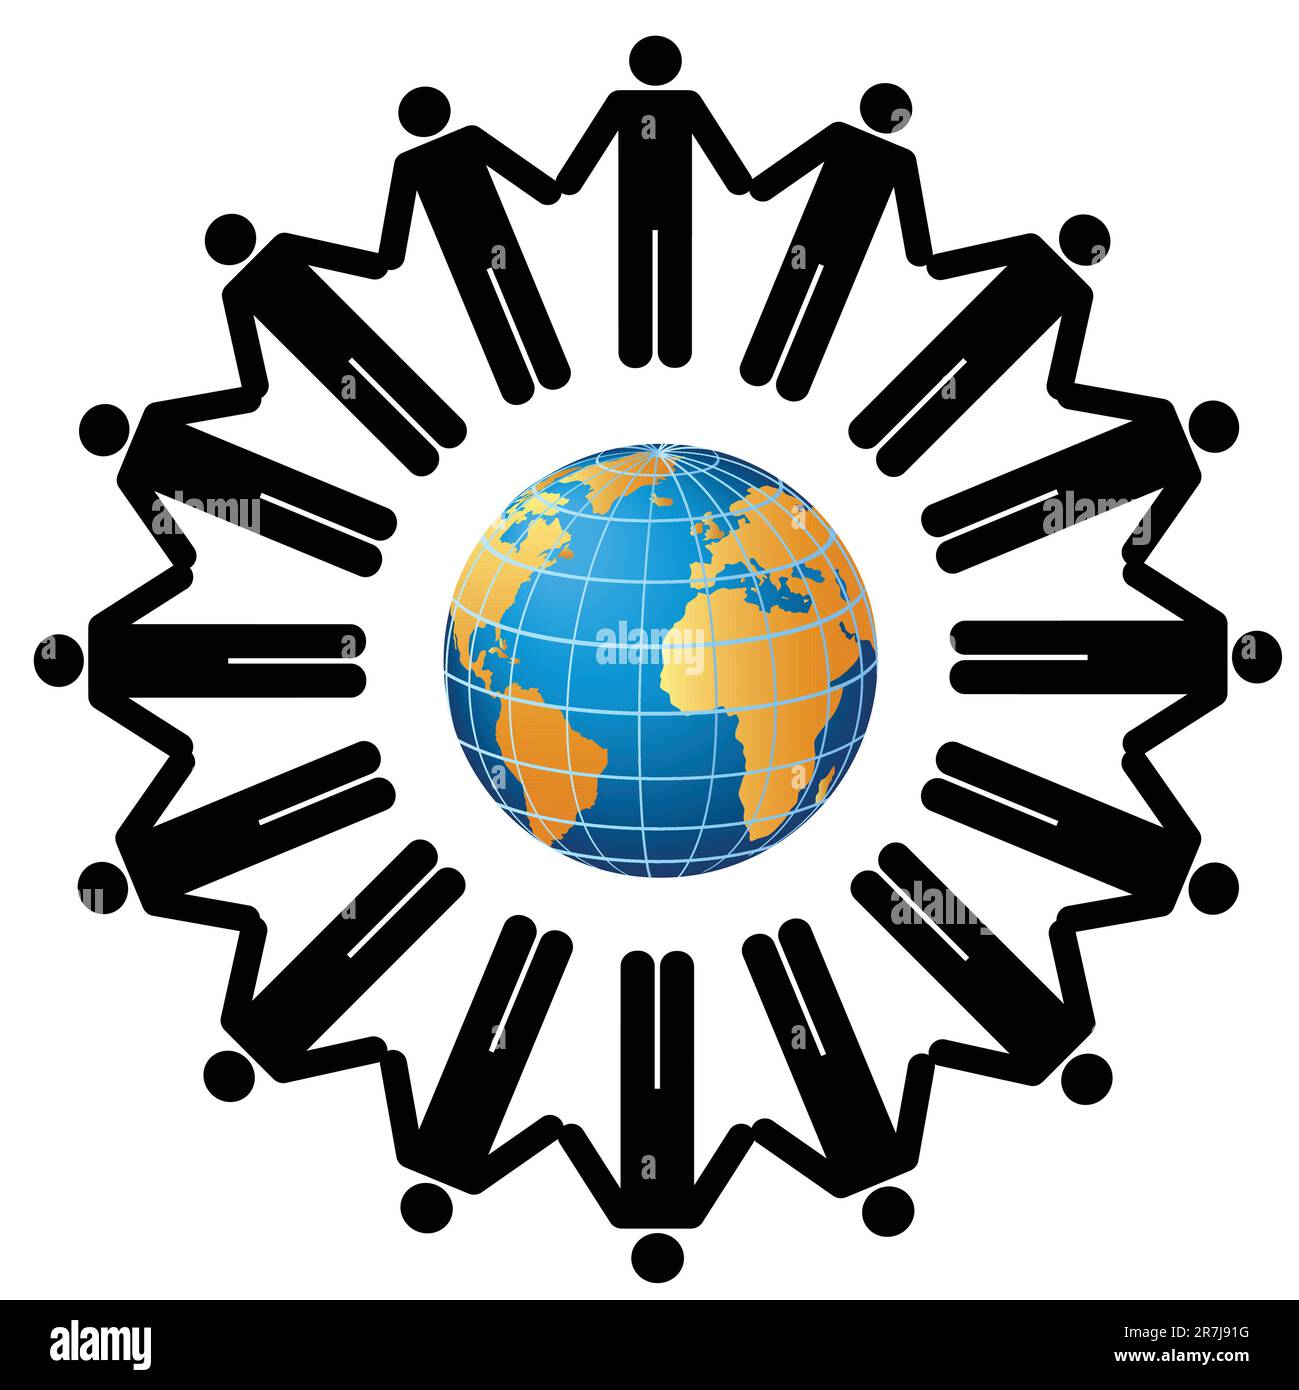 People around the globe holding hands Stock Vector